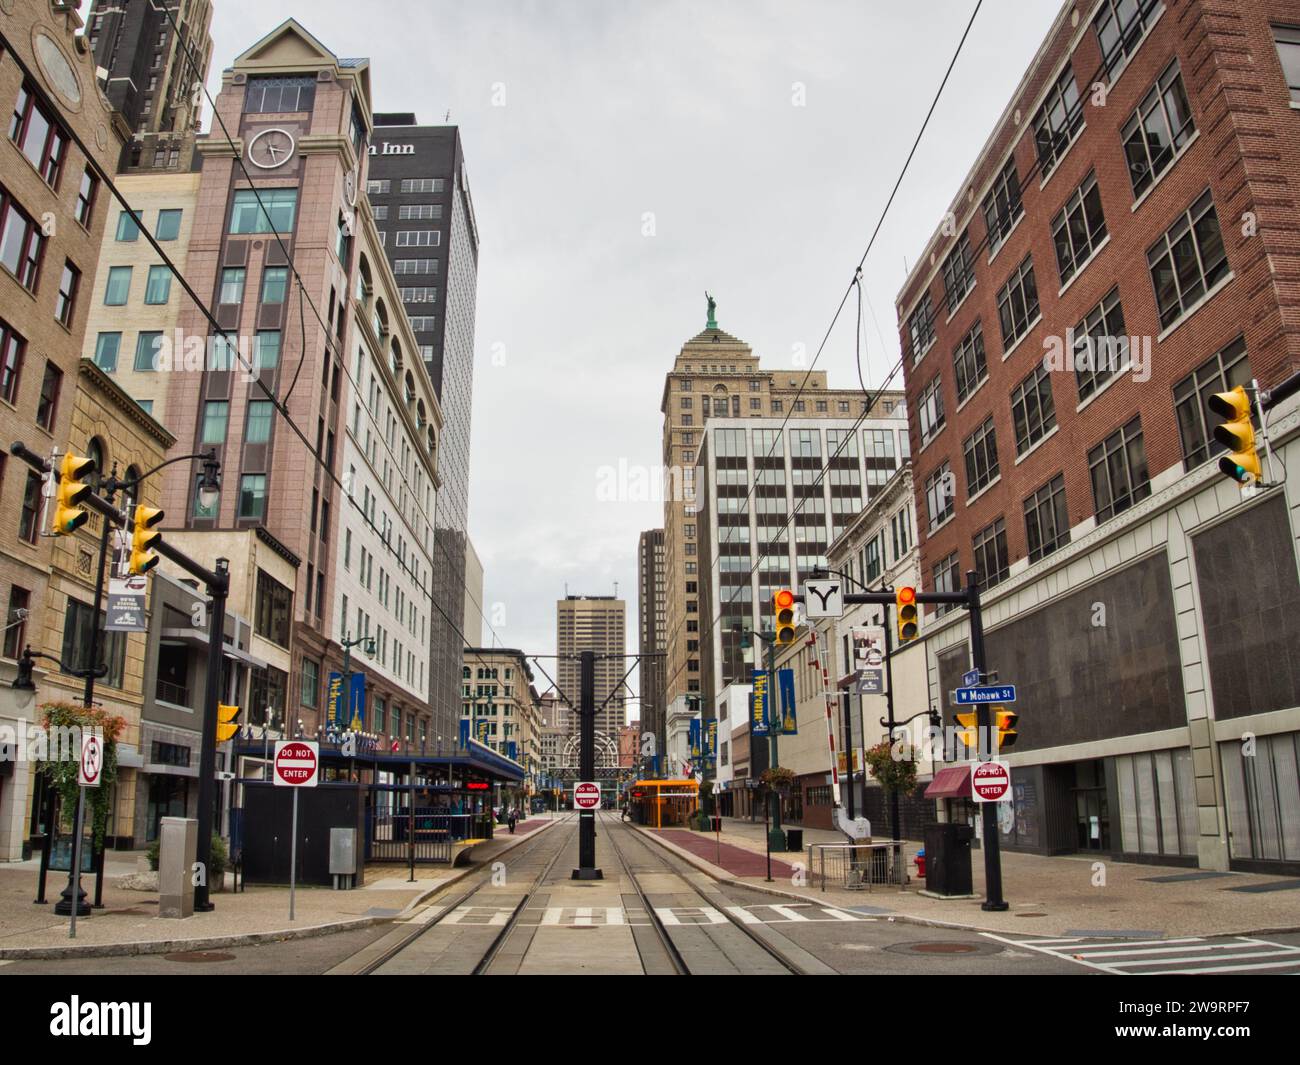 Downtown Buffalo, NY at the intersection of Mohawk and Main Streets. Business district with red traffic light and street car tracks. Stock Photo